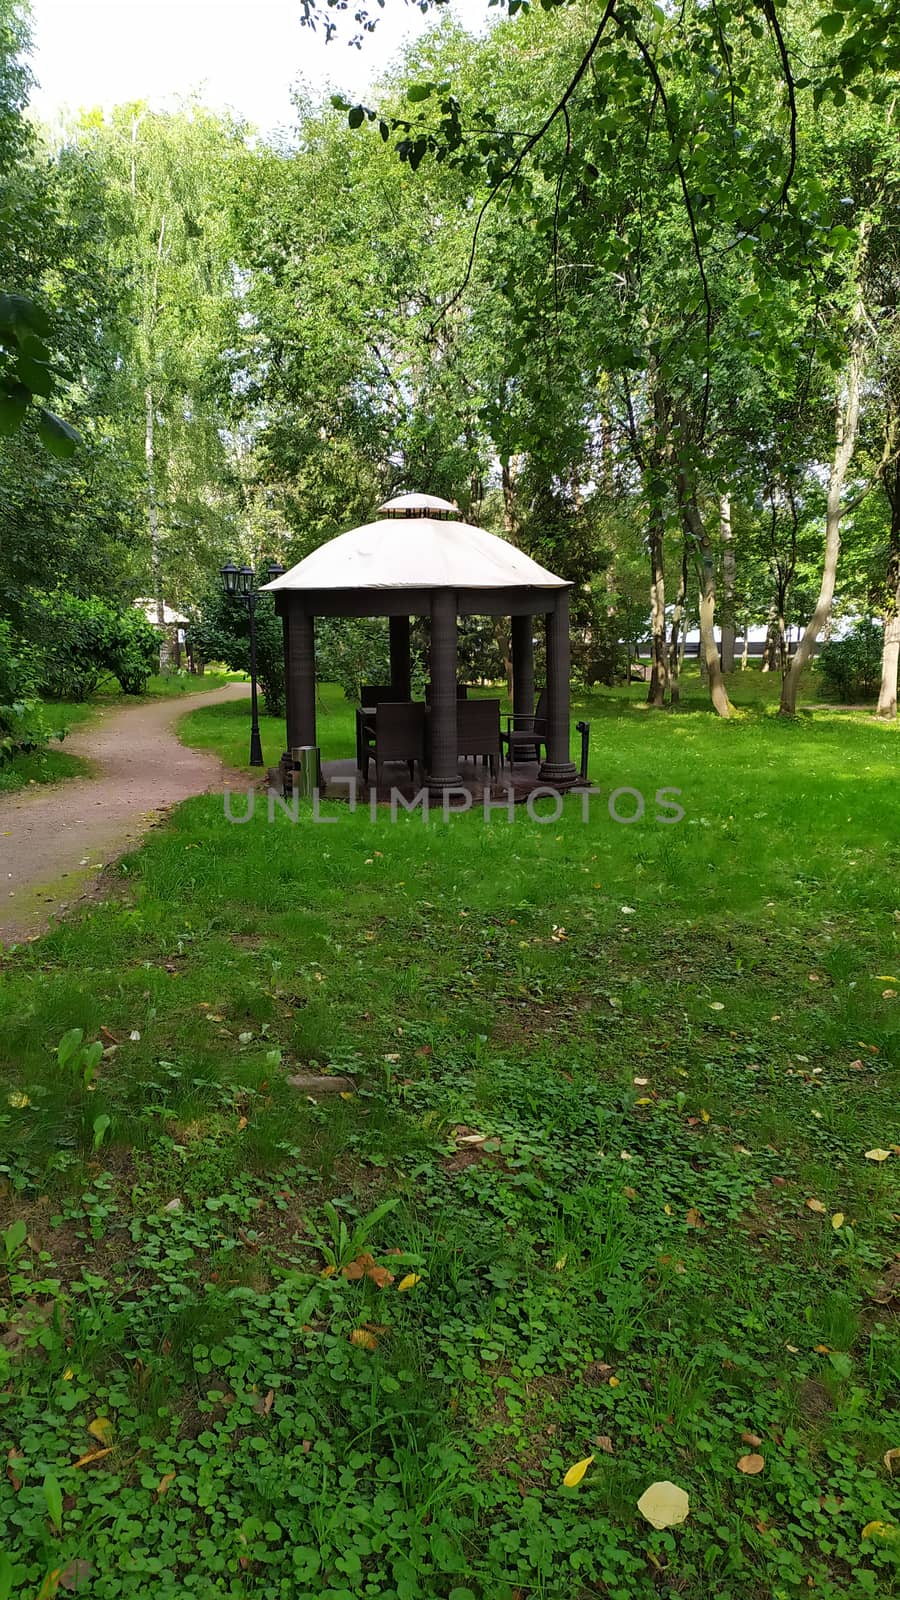 Gravel walking trail through forest, hiking trail, nature walk concept, green trees, plants on either side of pathway. Well maintained footpath through natural surroundings